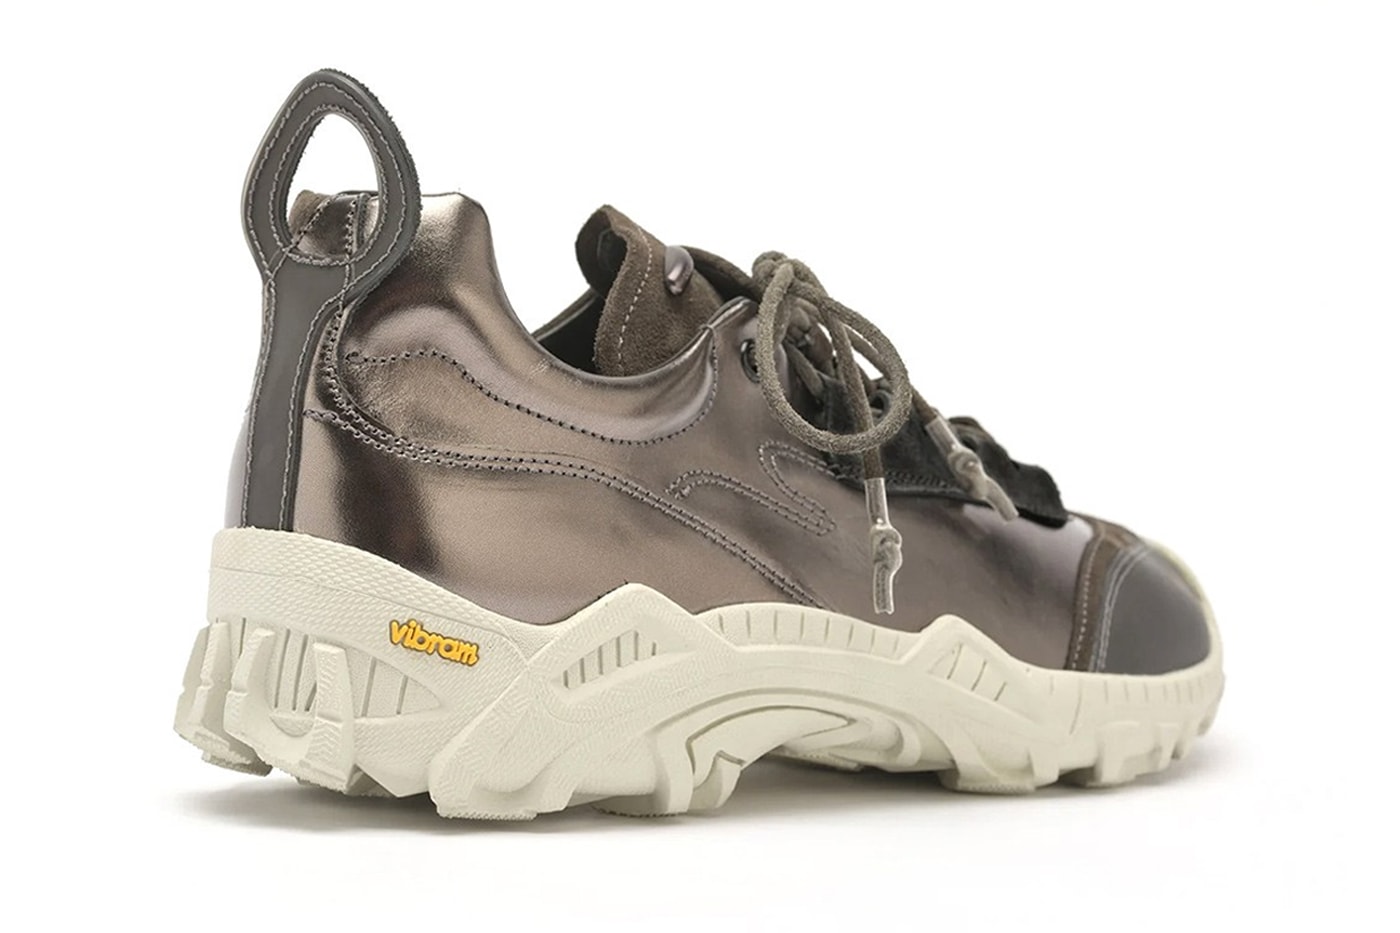 our legacy gabe chrome peak shoe vibram release date info store list buying guide photos price 